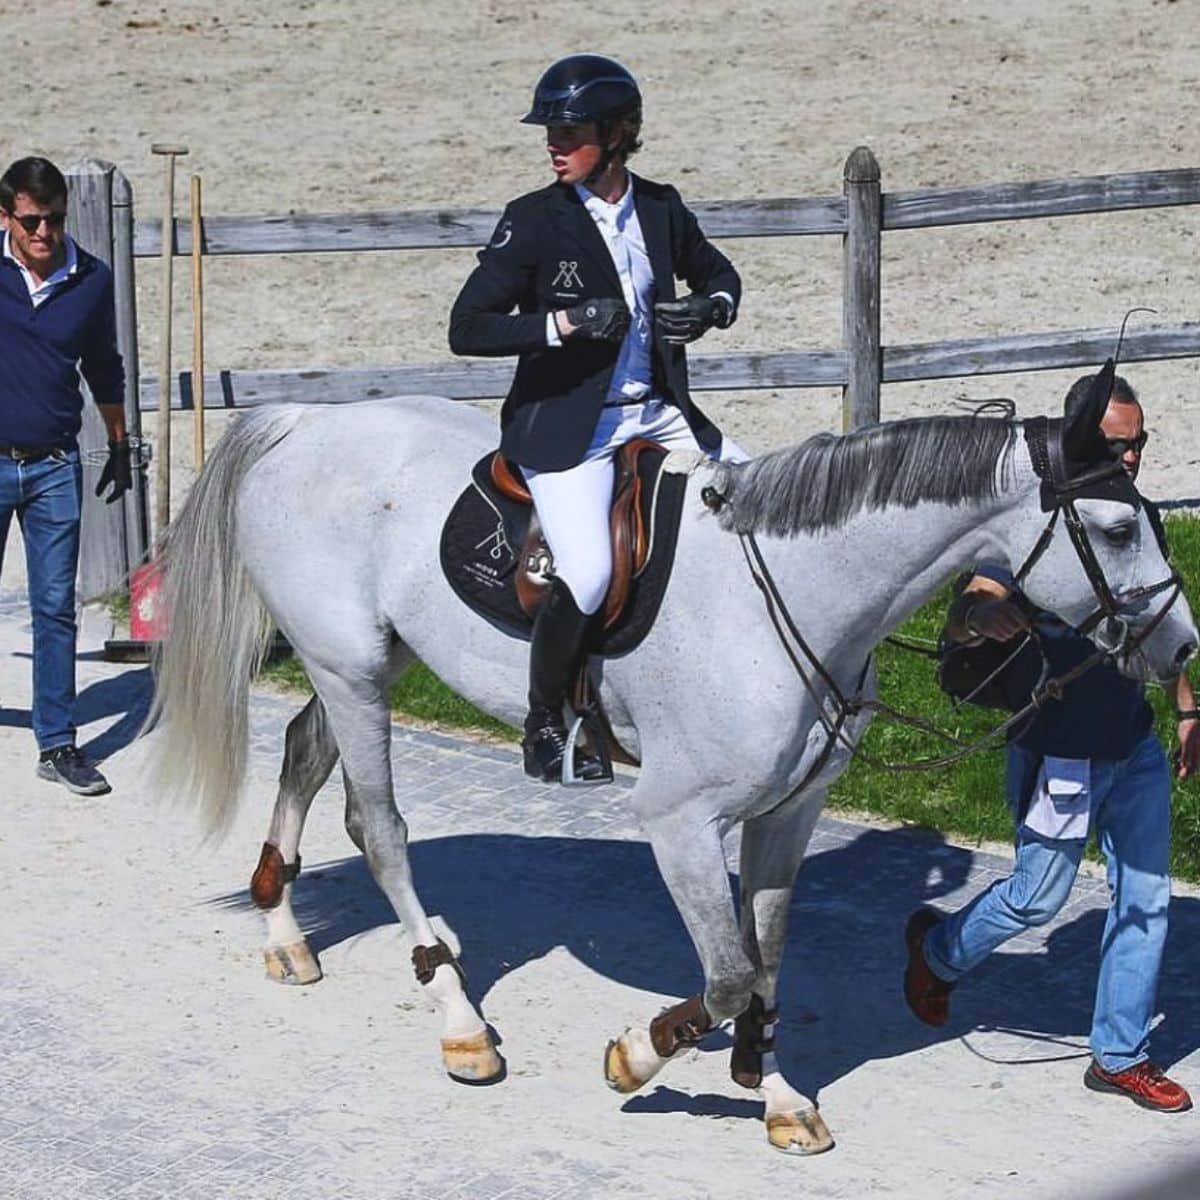 A male Equestrian rider wears a black jaket rides a gray horse.